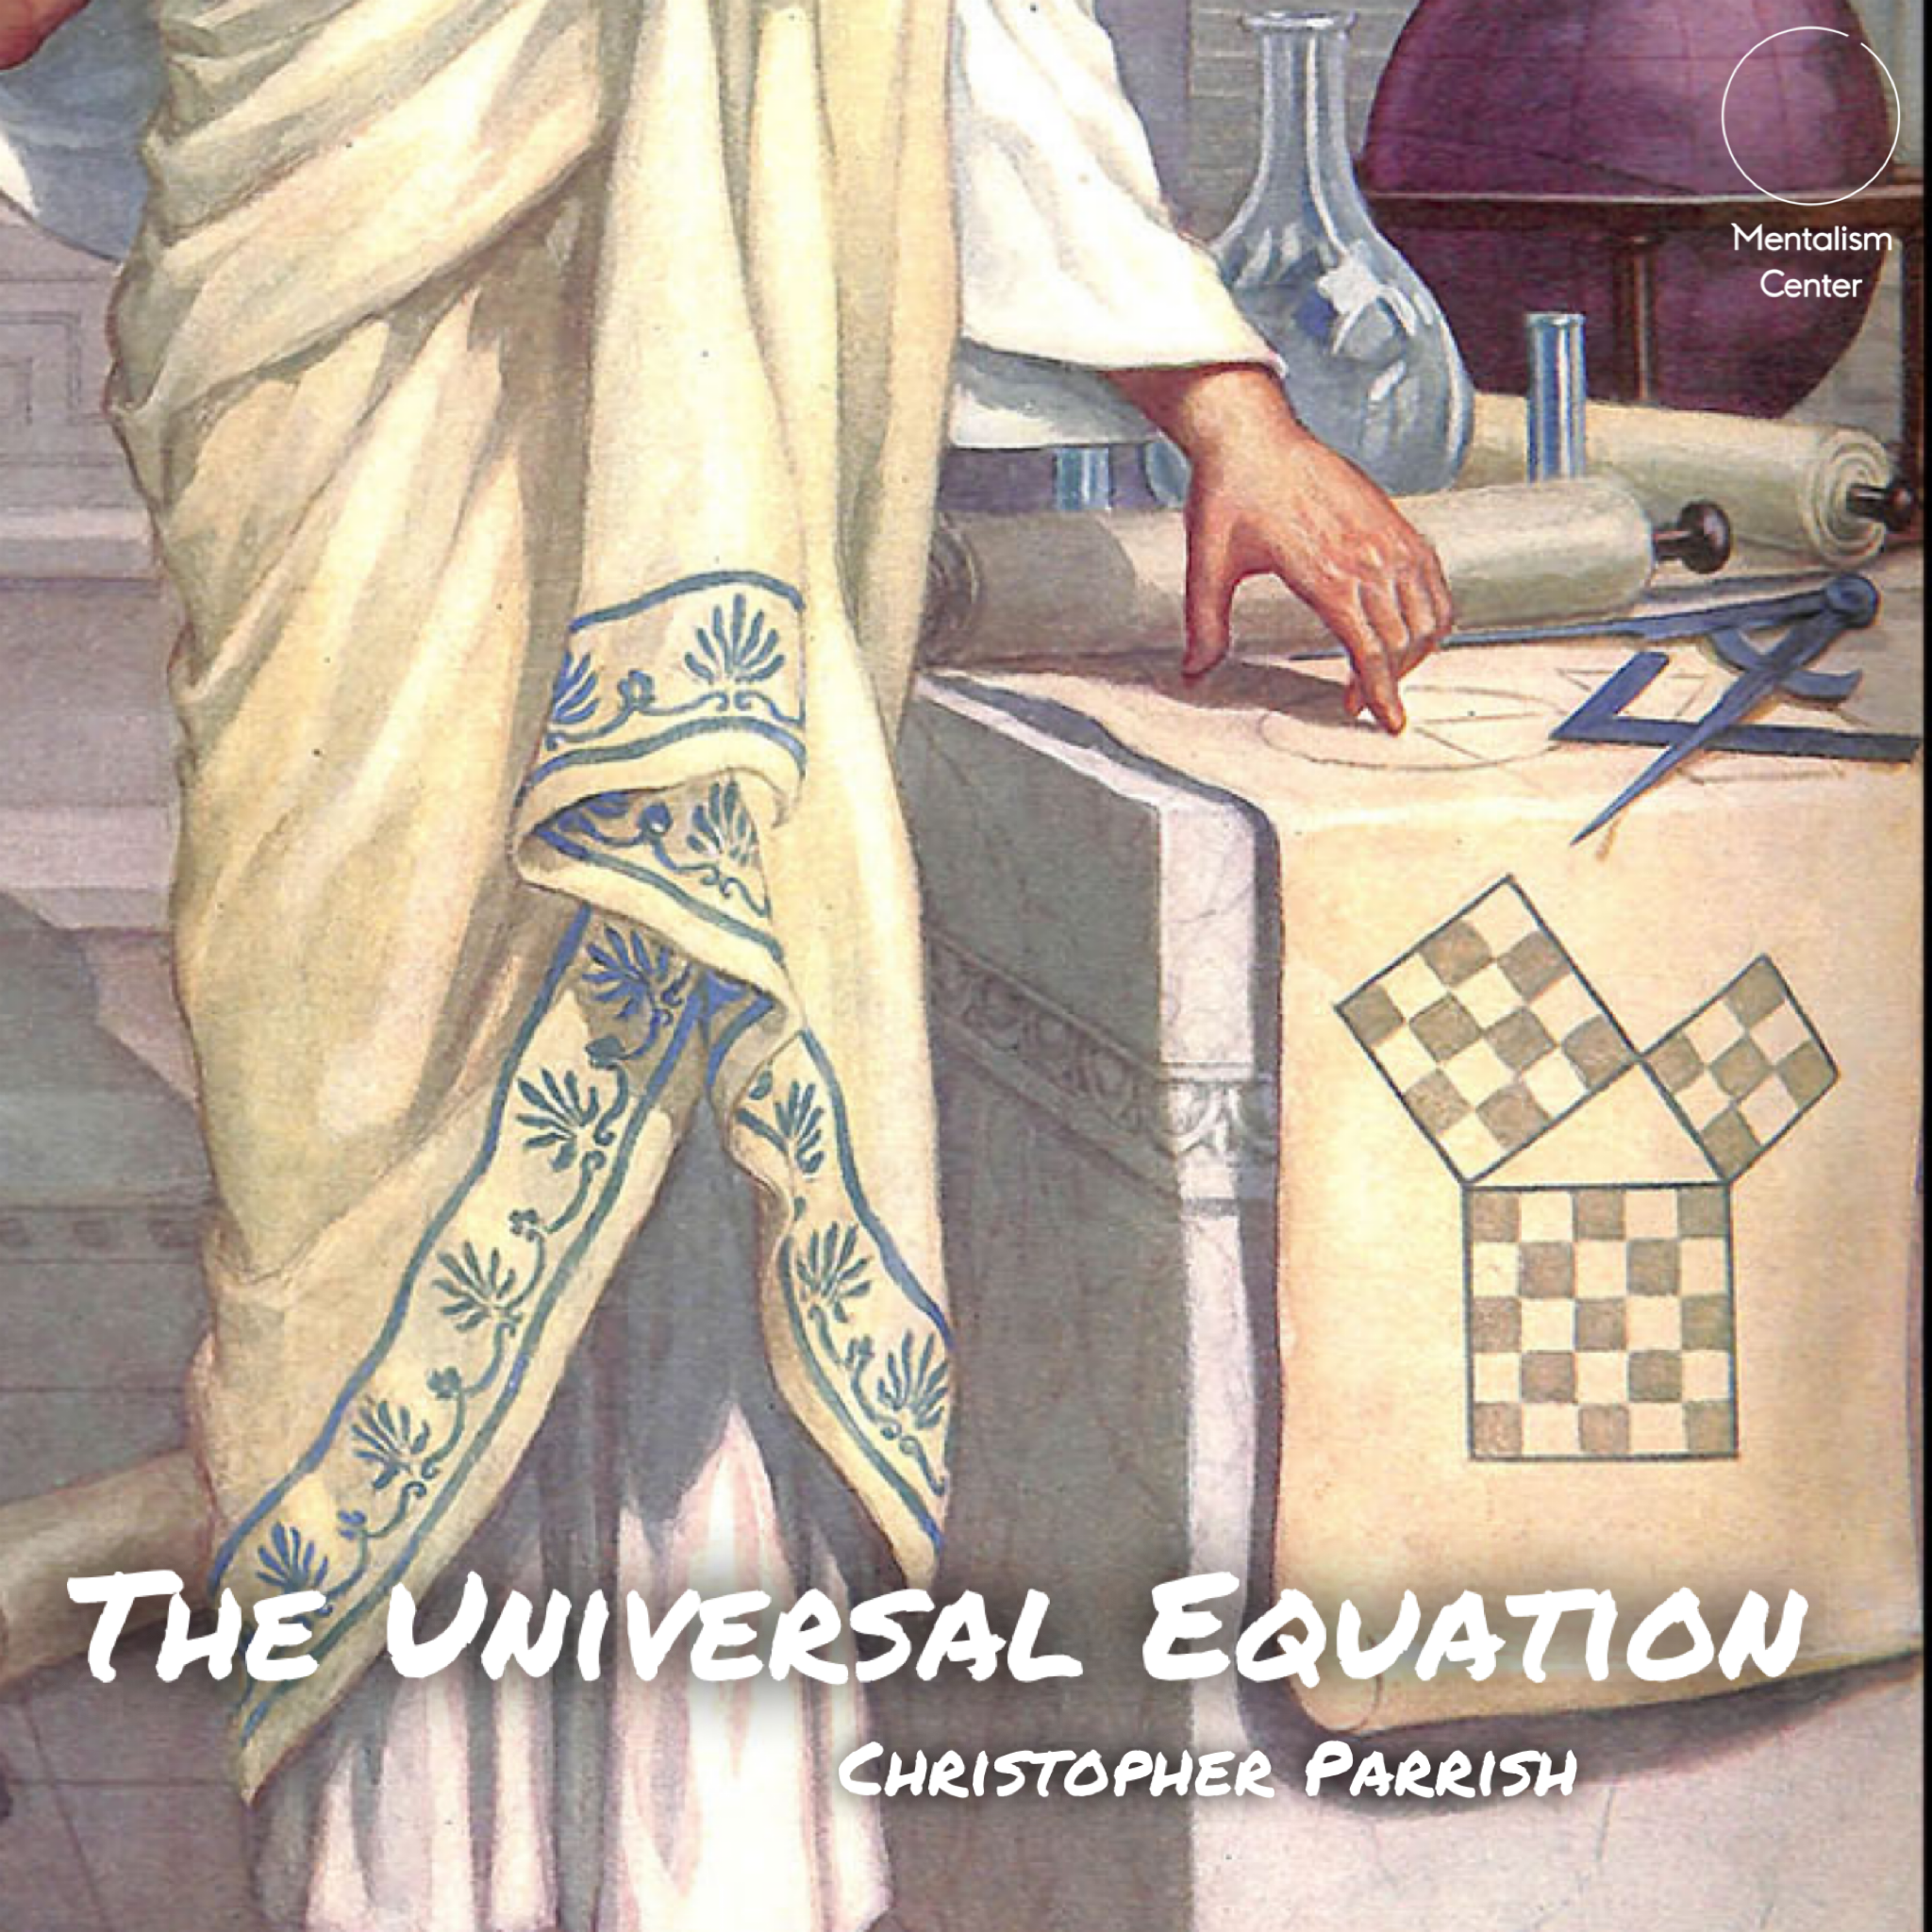 Christopher Parrish - The Universal Equation